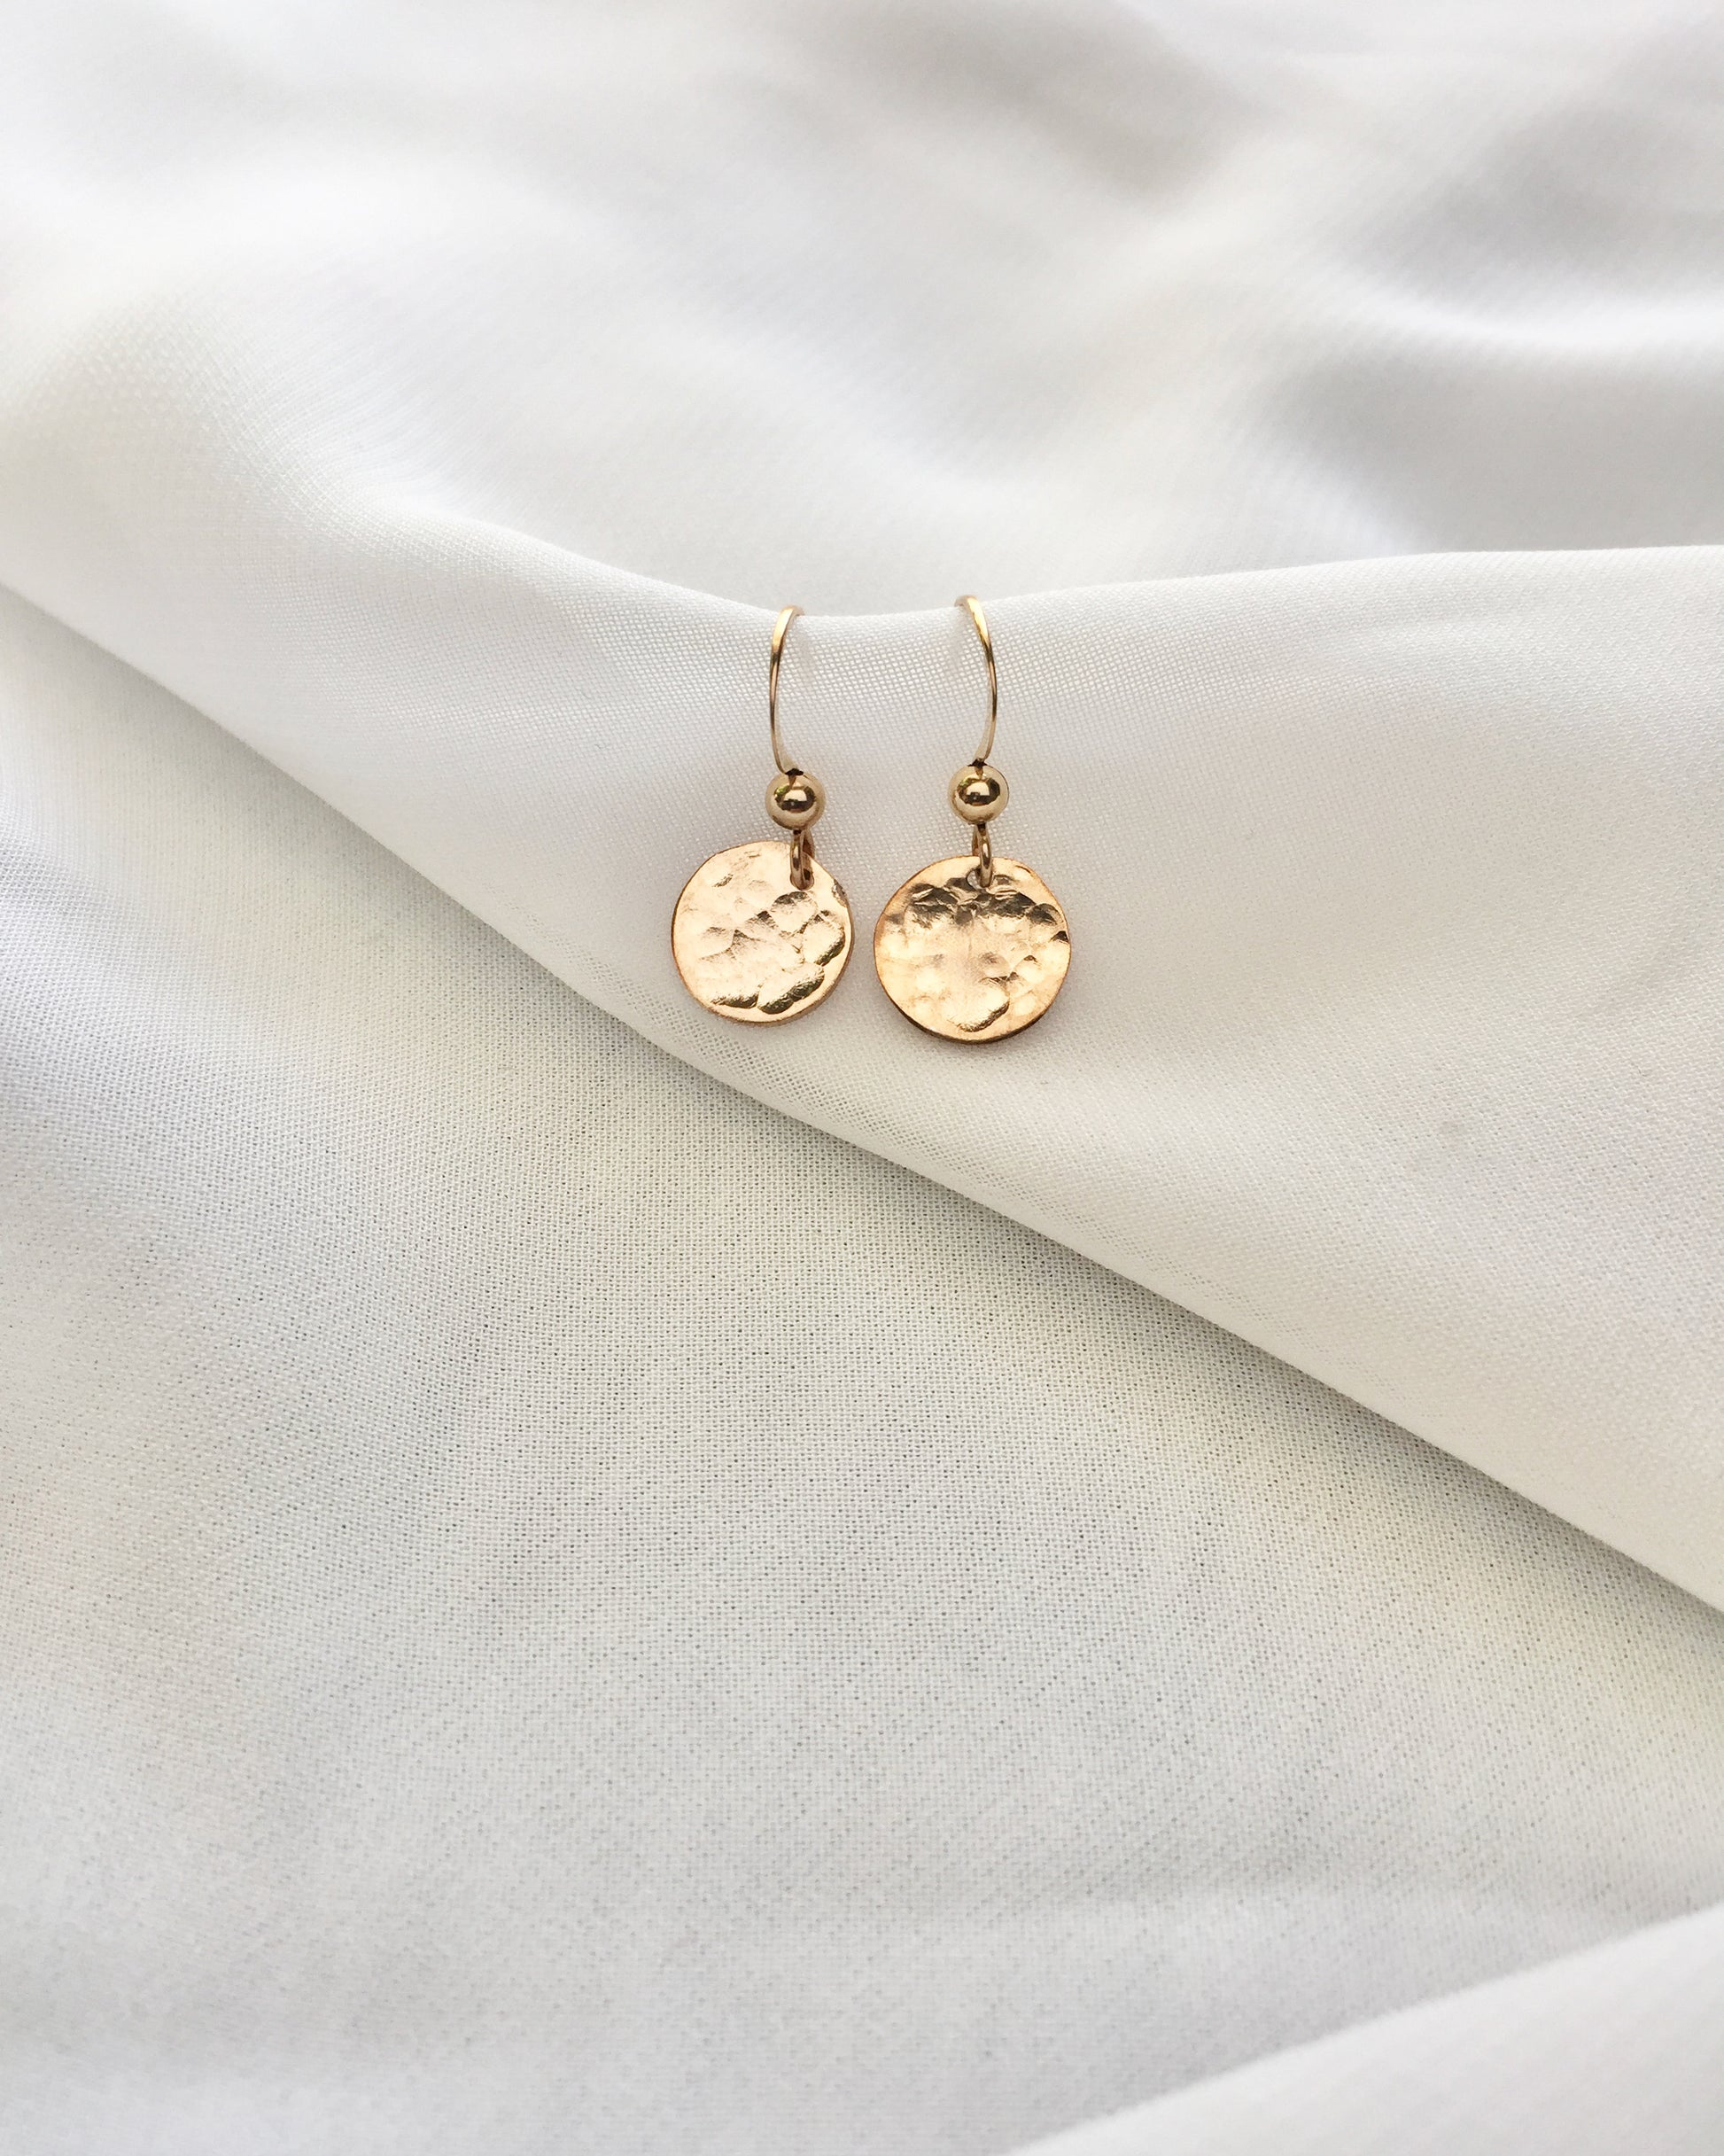 Hammered Disc Earrings | Dainty Everyday Earrings in Gold Filled or Sterling Silver | IB Jewelry